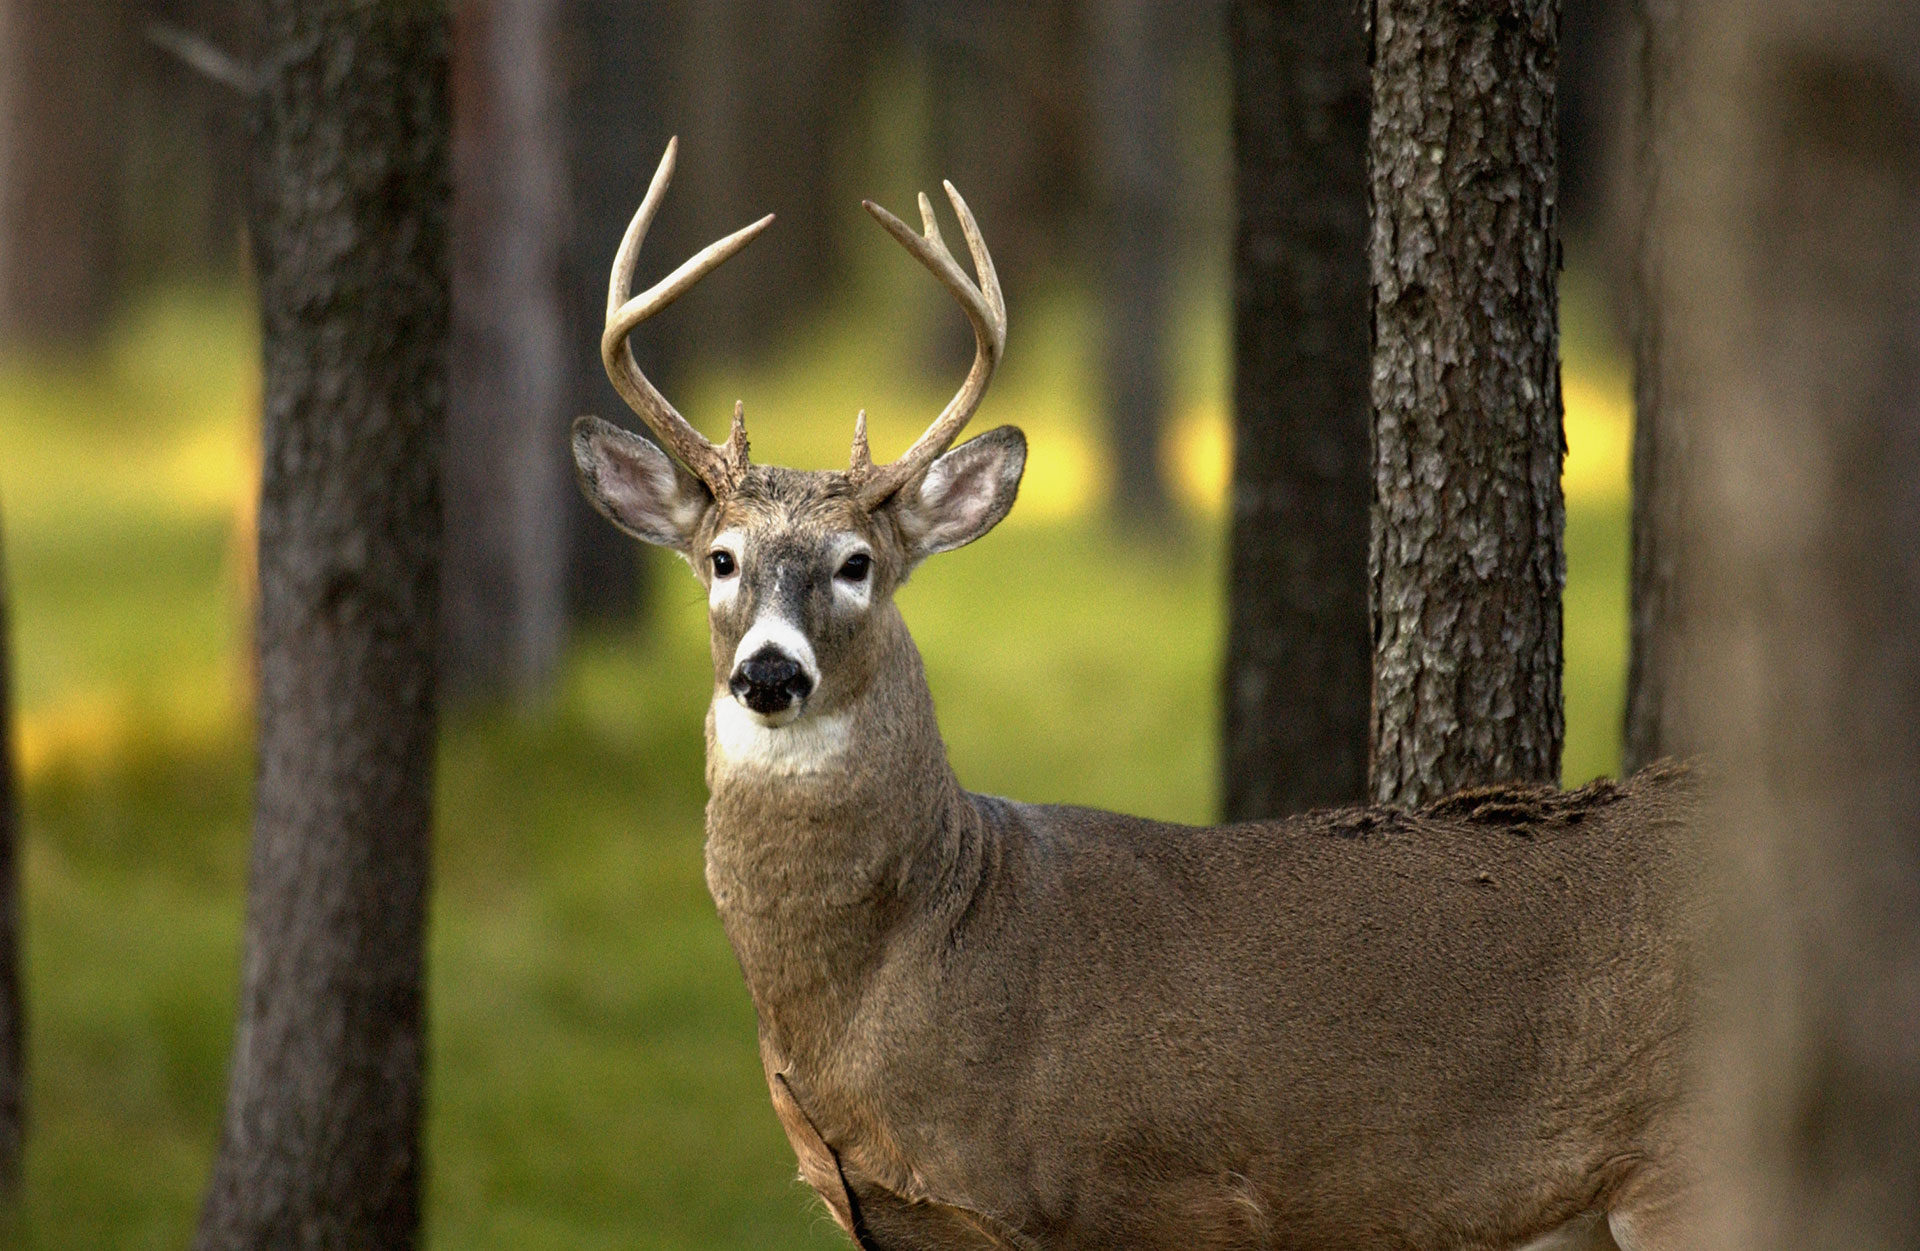 Deer hunters’ impact on the state extends far beyond Michigan’s fields and woods